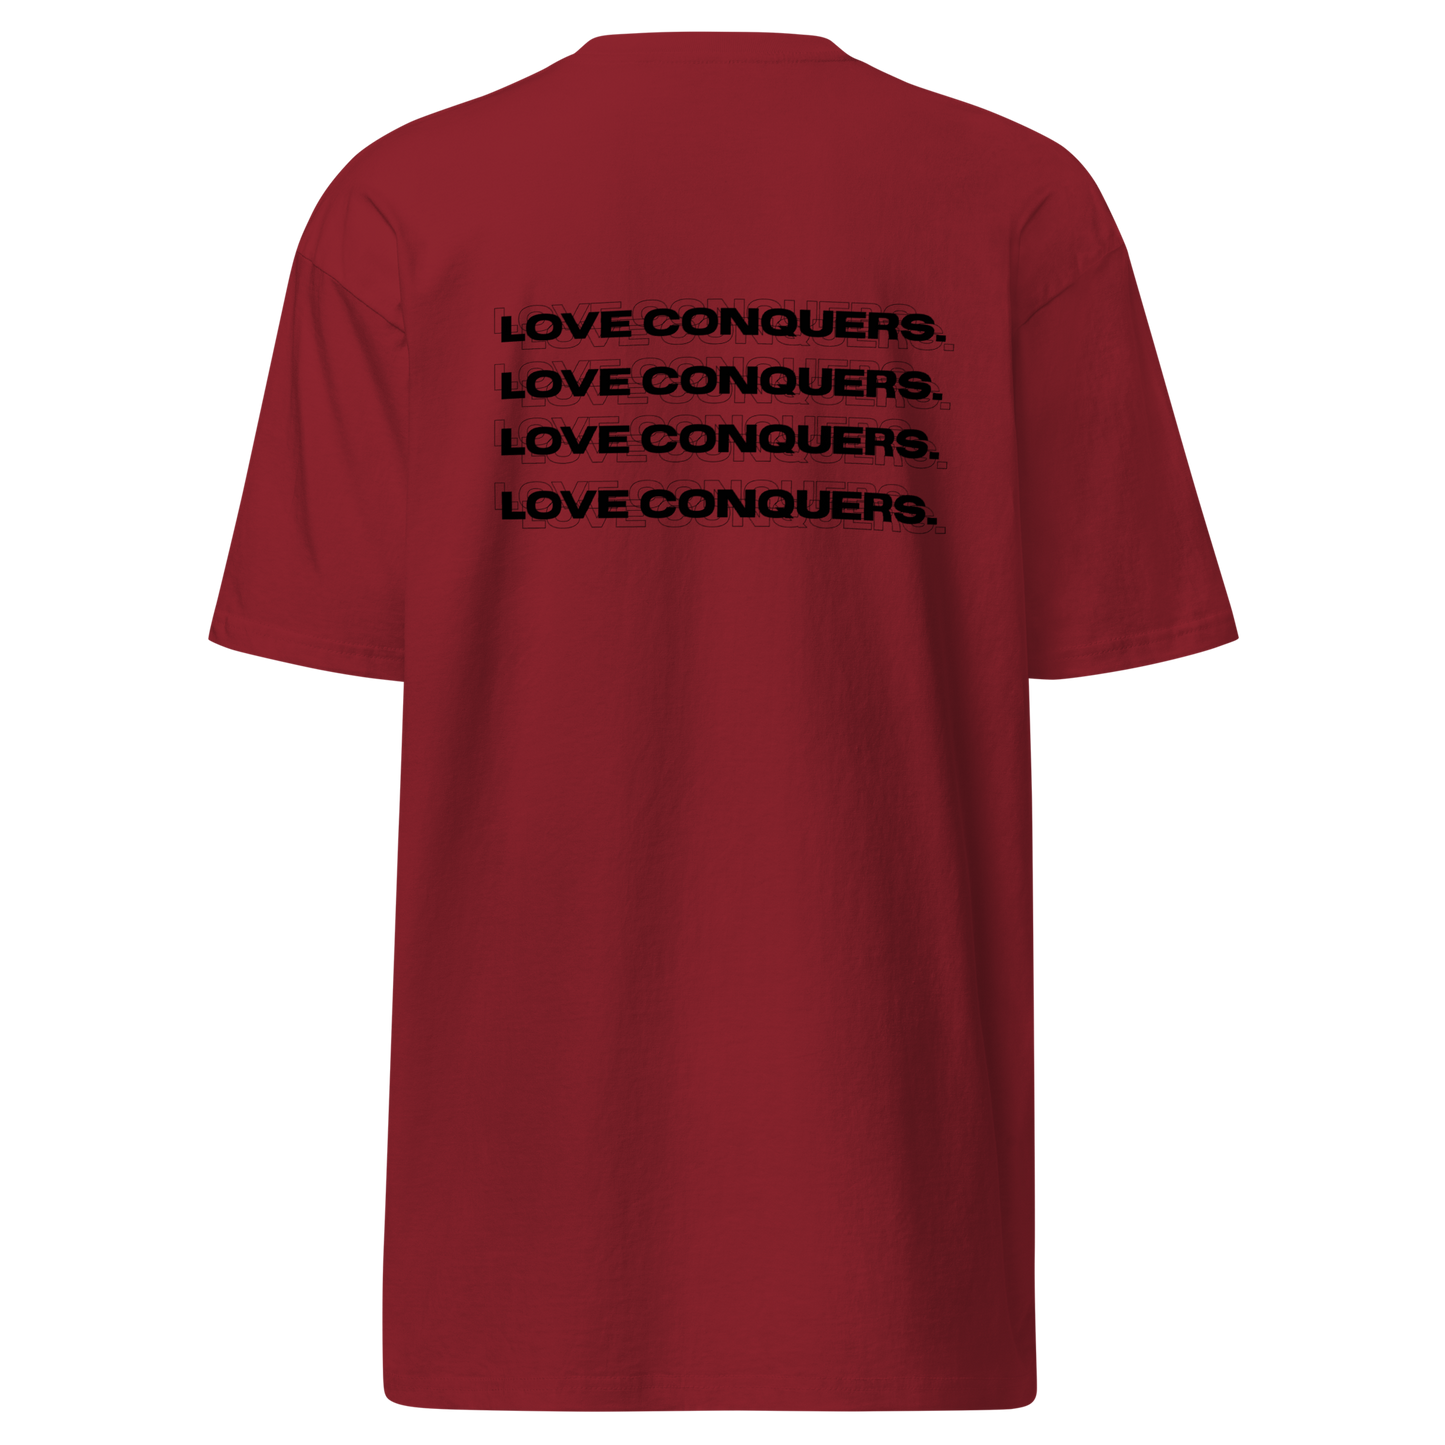 Do all things with LOVE. Premium heavyweight tee